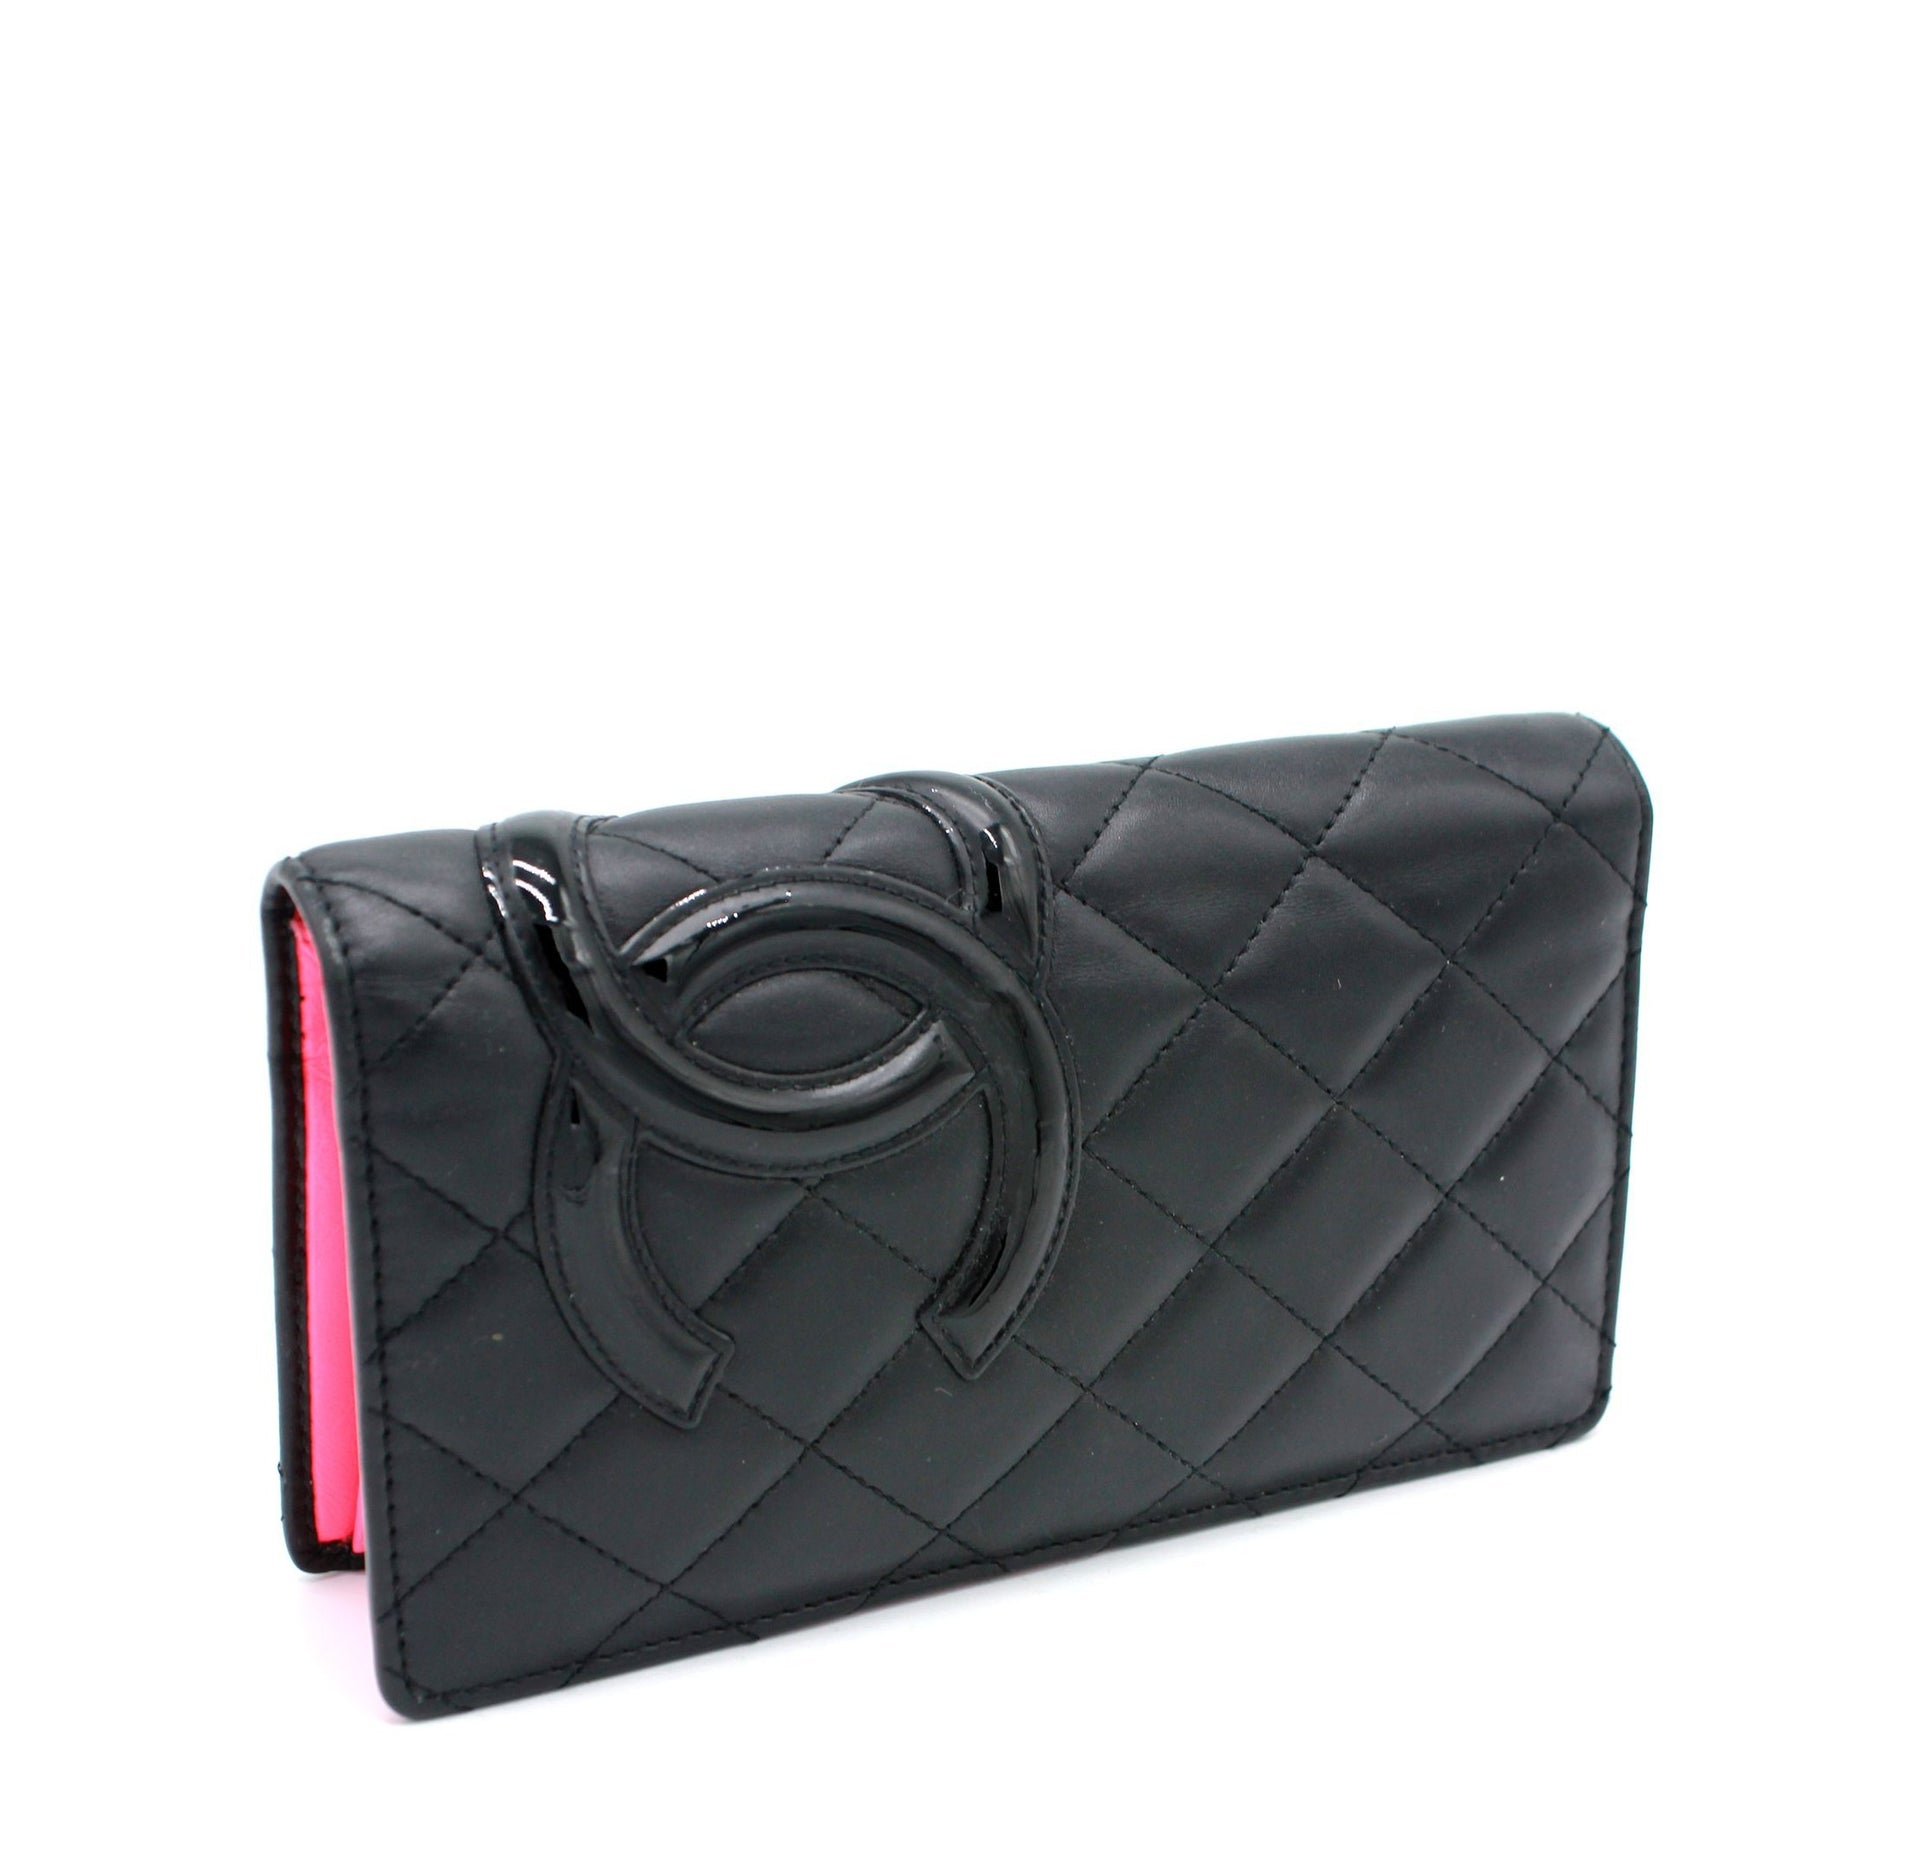 Chanel Bifold Medium Wallet in Black Caviar with Gold Hardware  SOLD